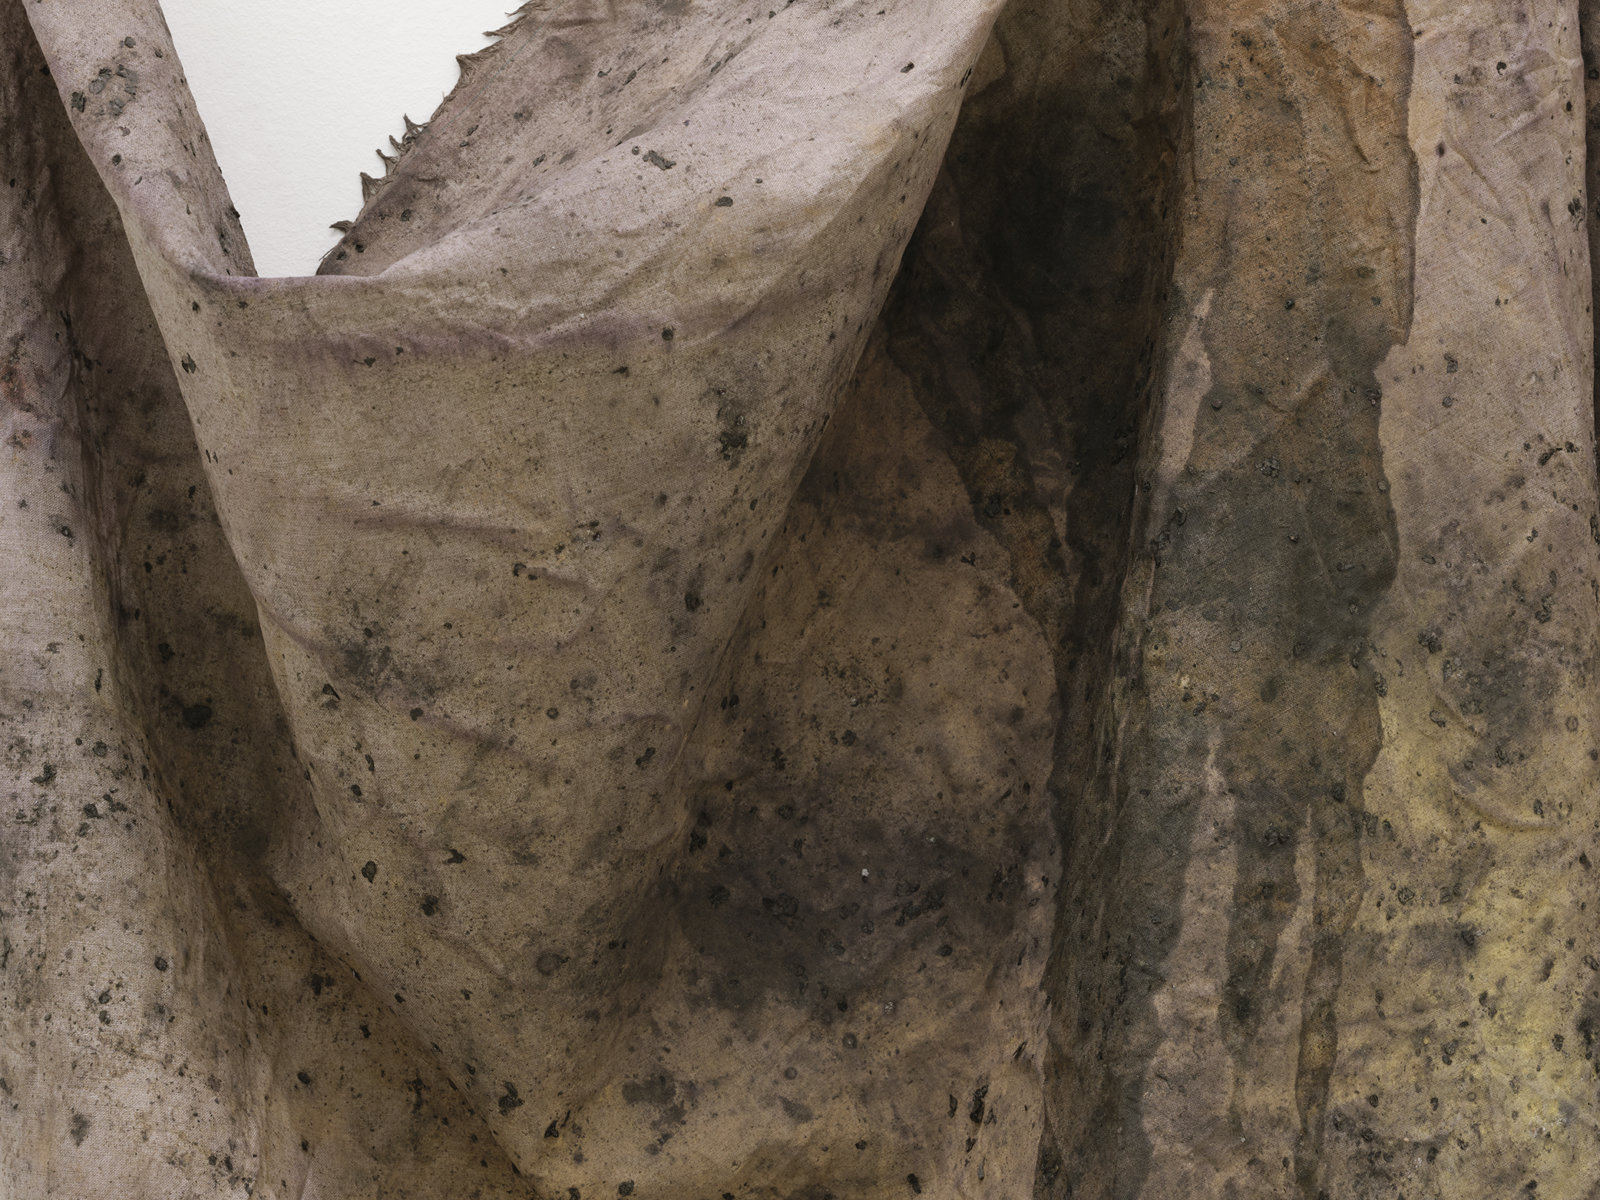 Duane Linklater, crust cloth remnant (detail), 2021, linen, cochineal dye, yellow ochre, honey, charcoal, nails, 66 x 56 x 7 in. (168 x 141 x 18 cm)